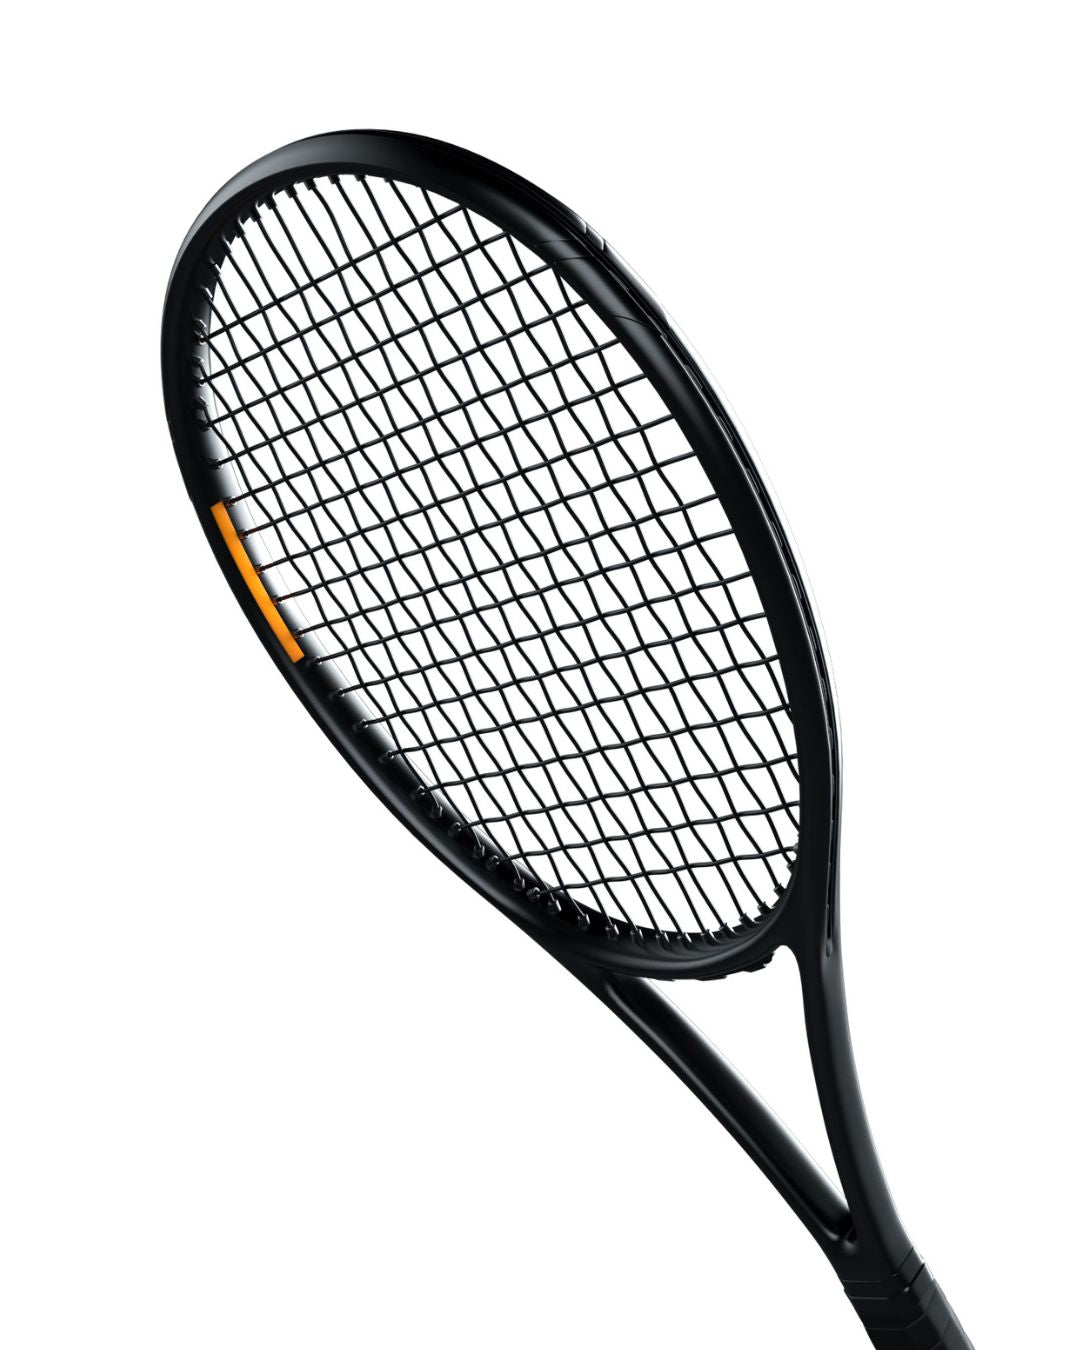 What is a Tennis Vibration Dampener